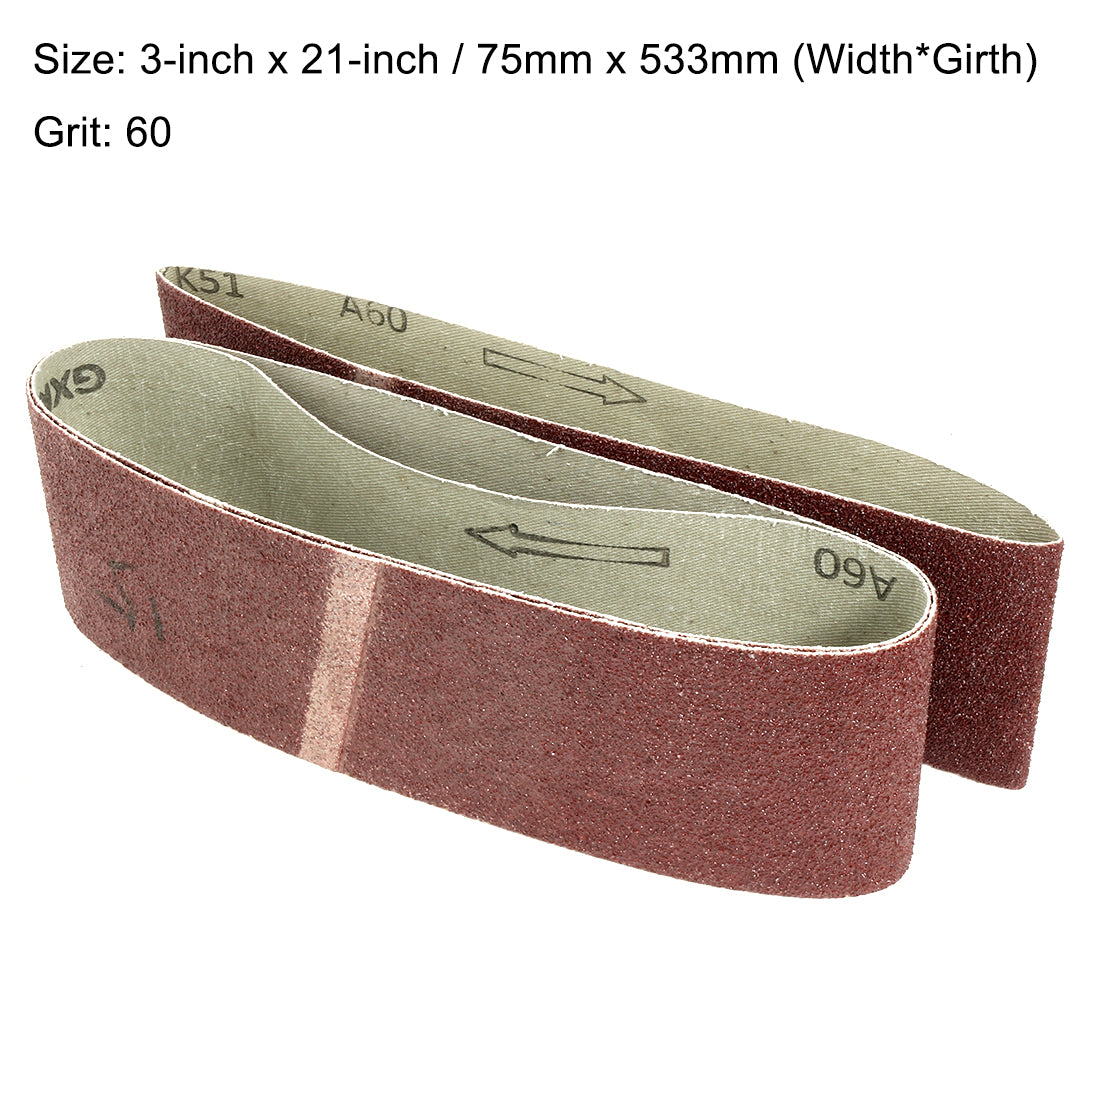 uxcell Uxcell 3-Inch x 21-Inch Aluminum Oxide Sanding Belt 60 Grits Lapped Joint 3pcs